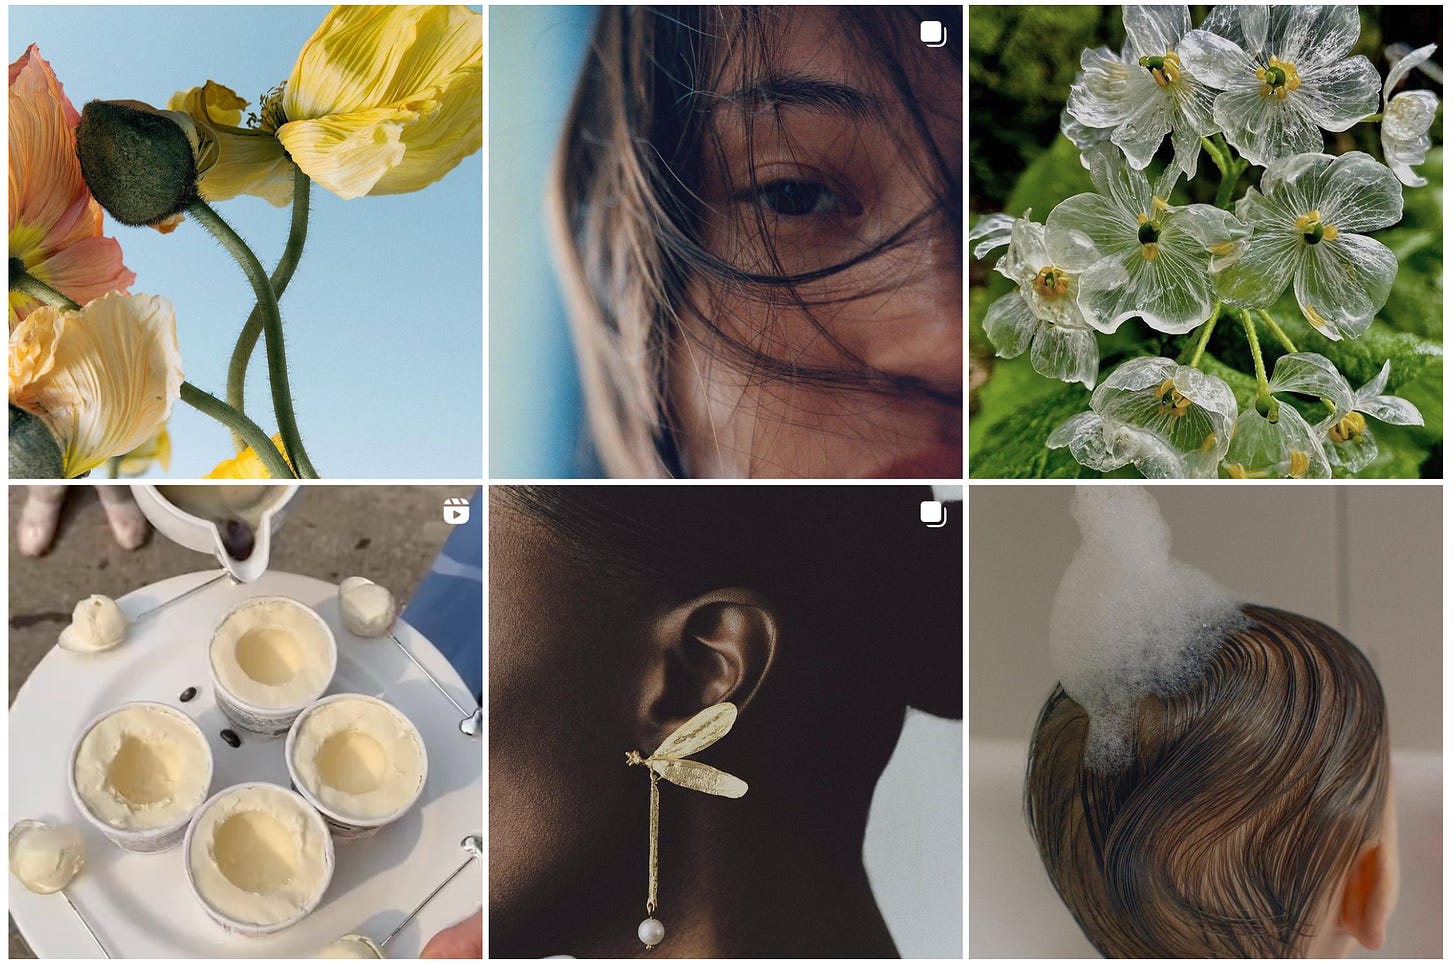 Screenshot from an "inspiration account" on Instagram. Photos of flowers, affogatos, earrings, and more.